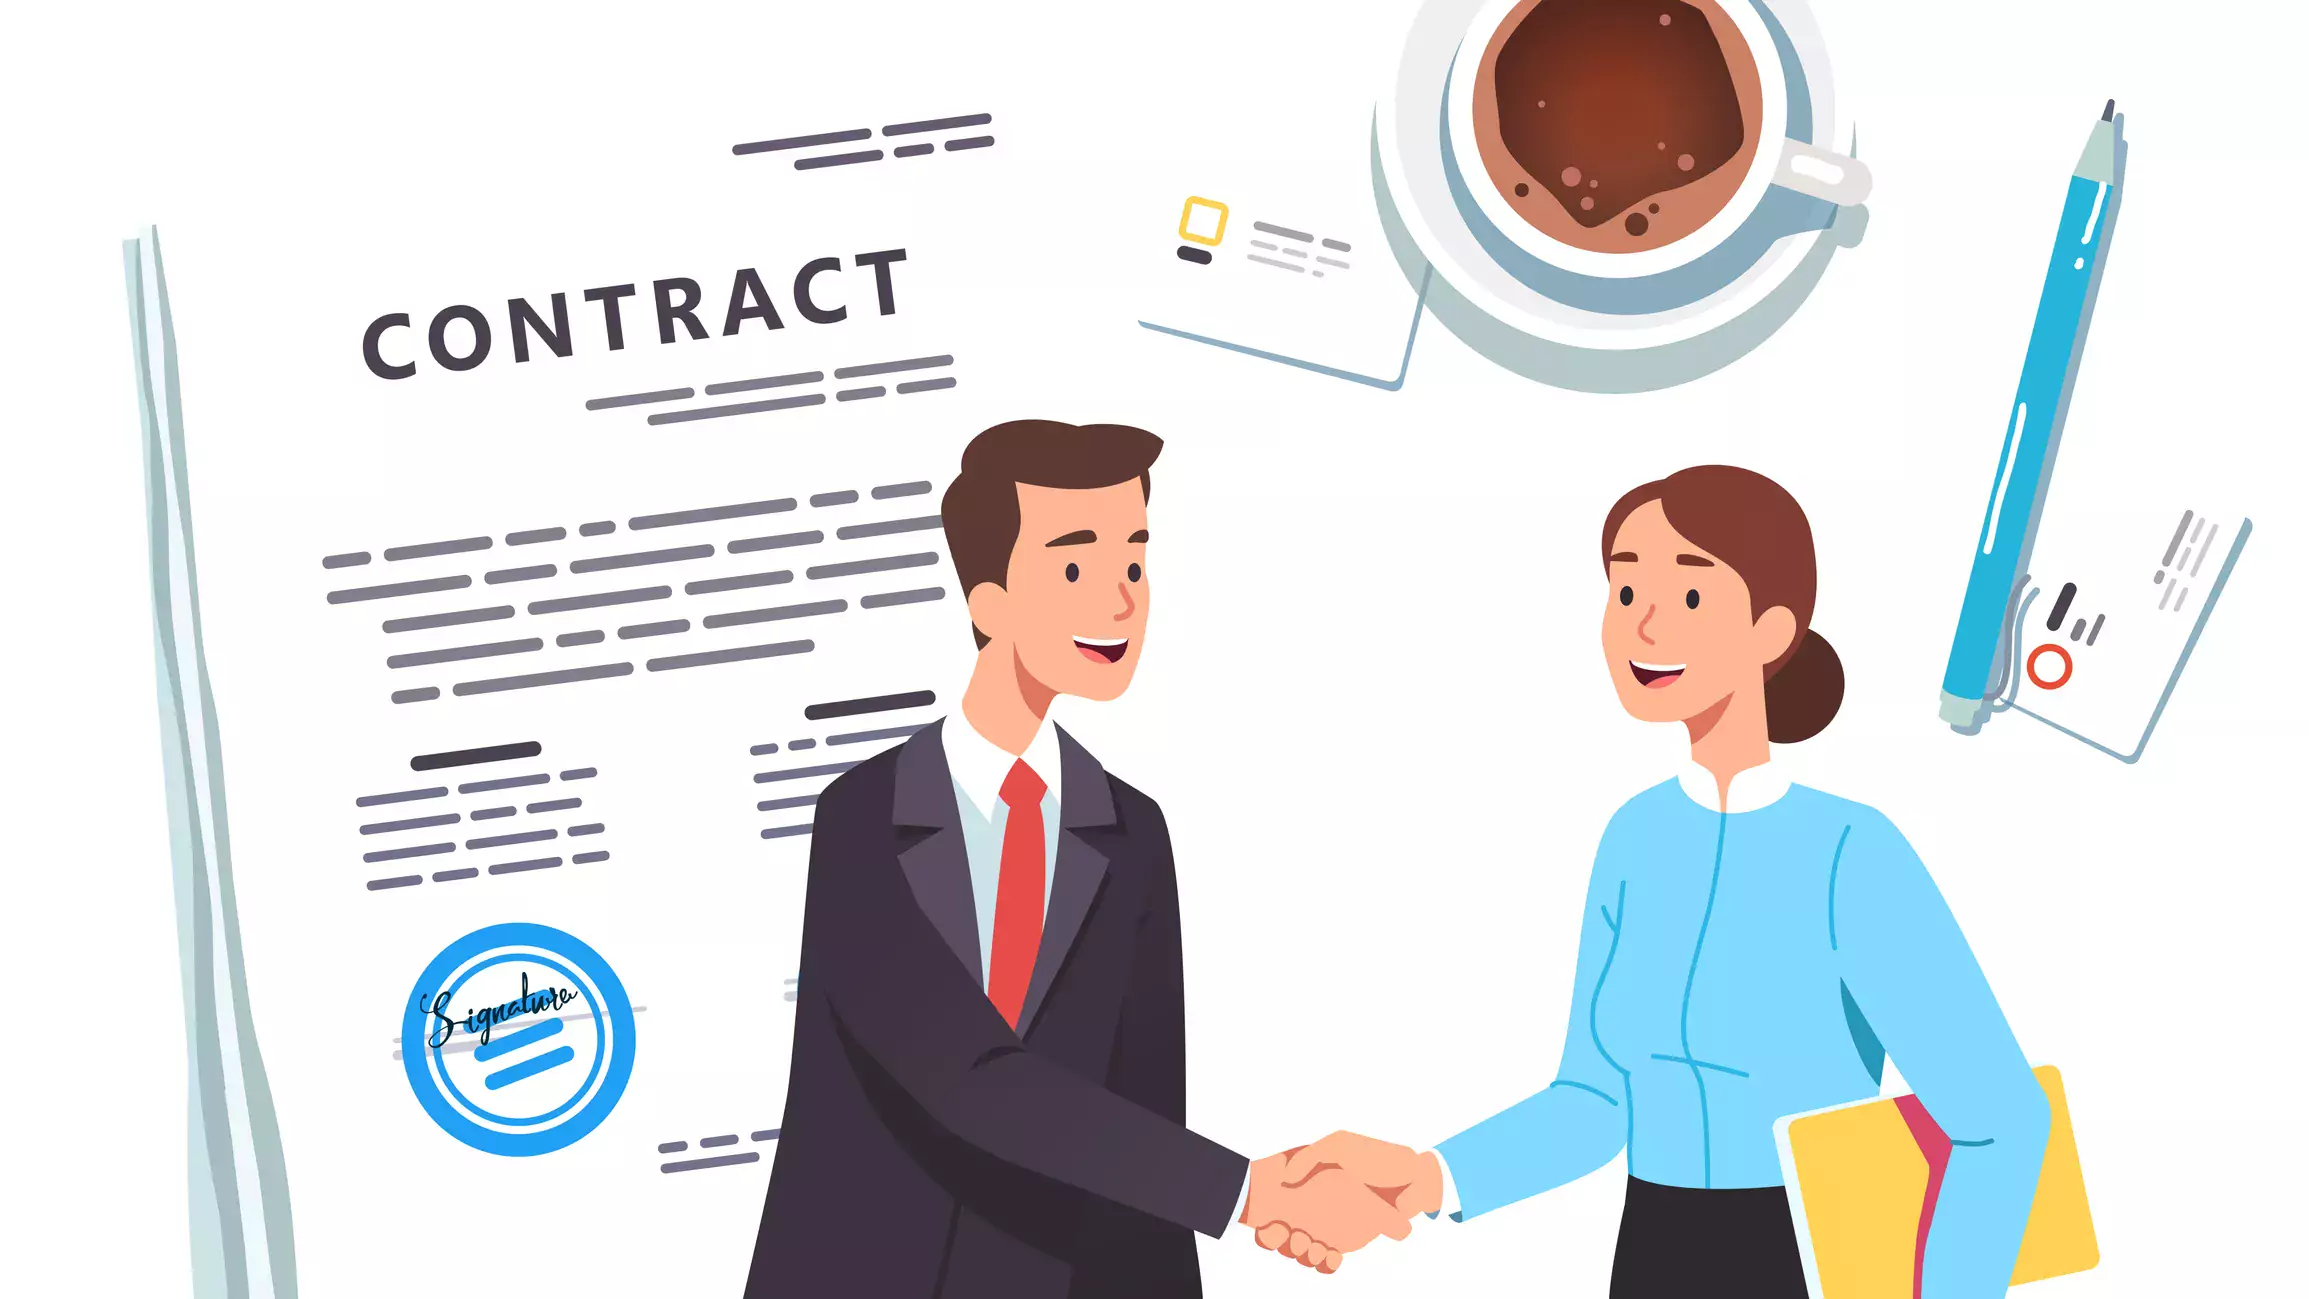 Research contracts and agreements